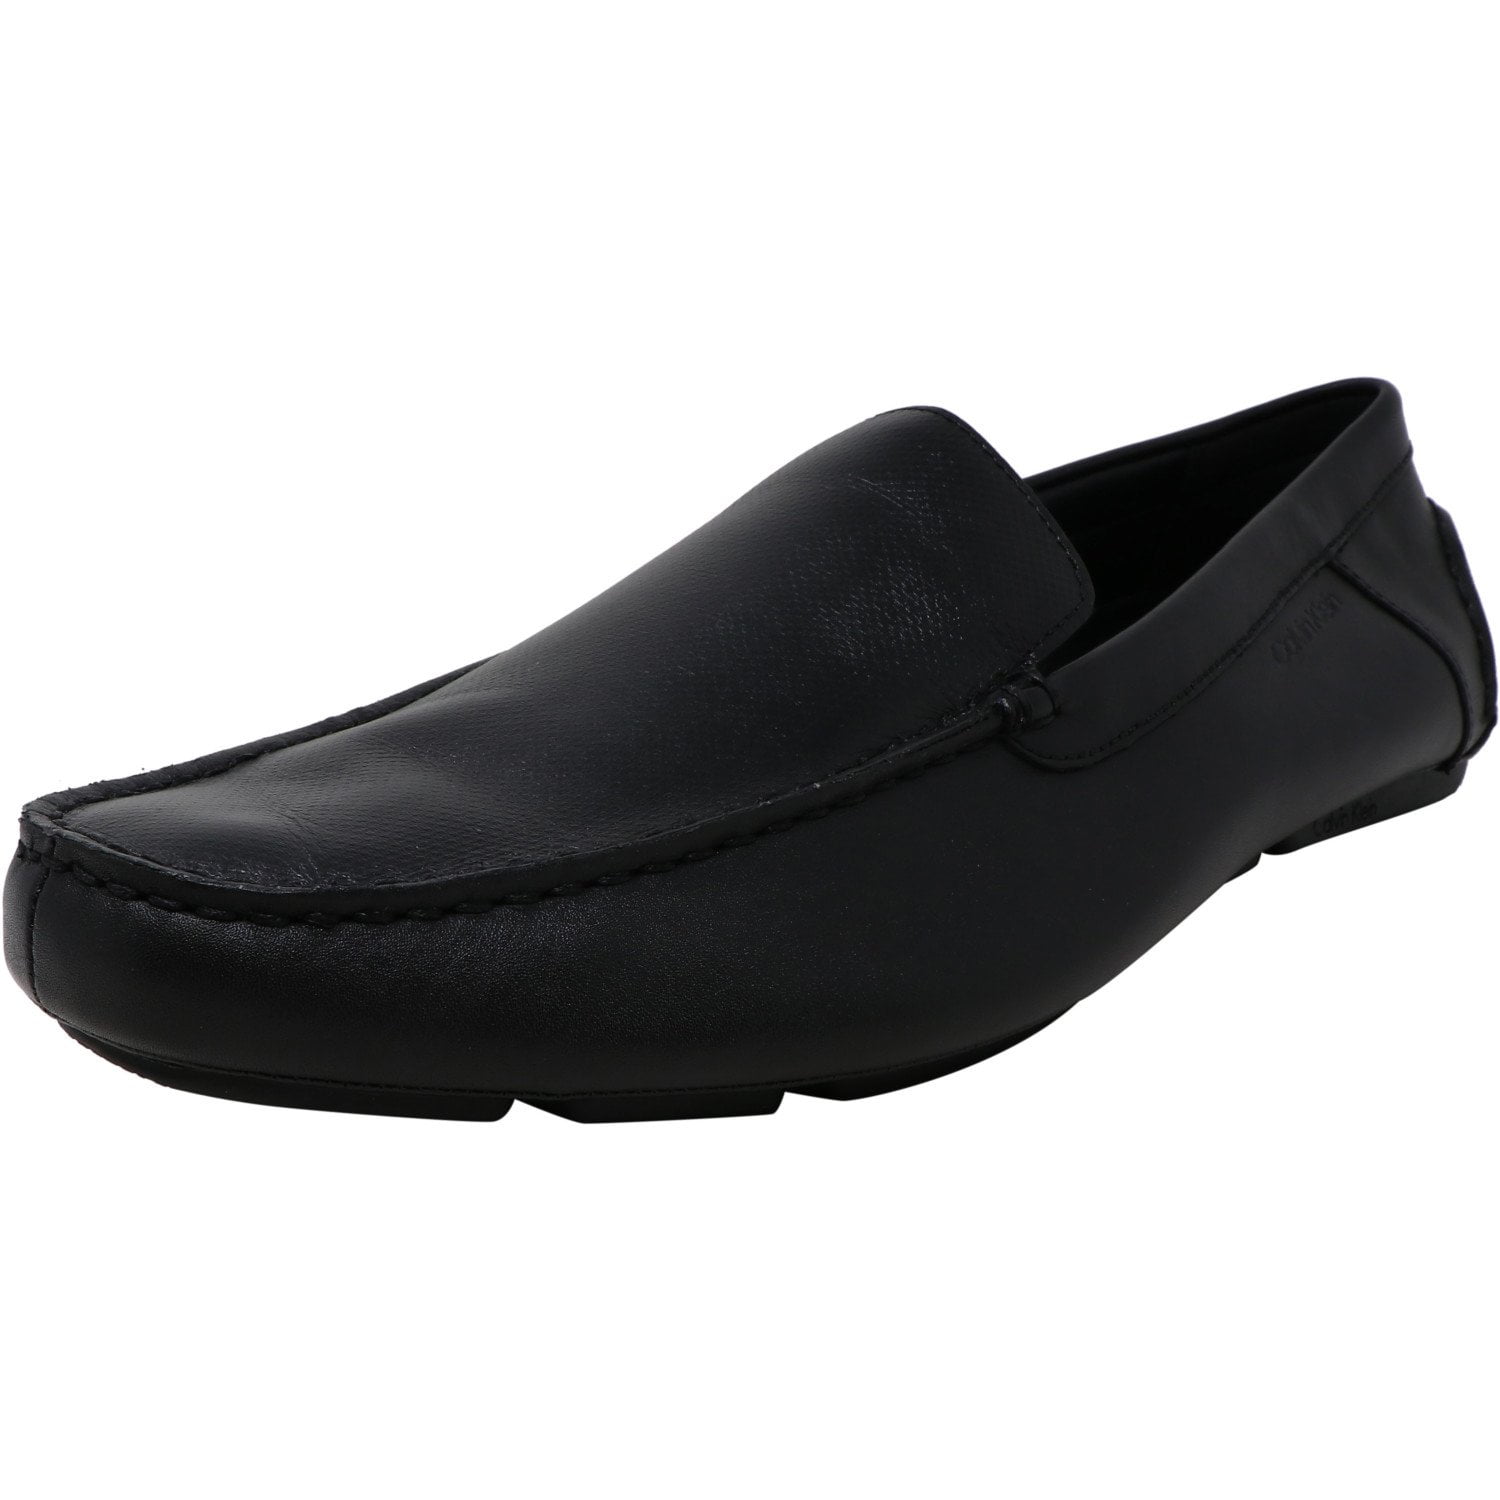 calvin klein men's miguel nappa leather loafers